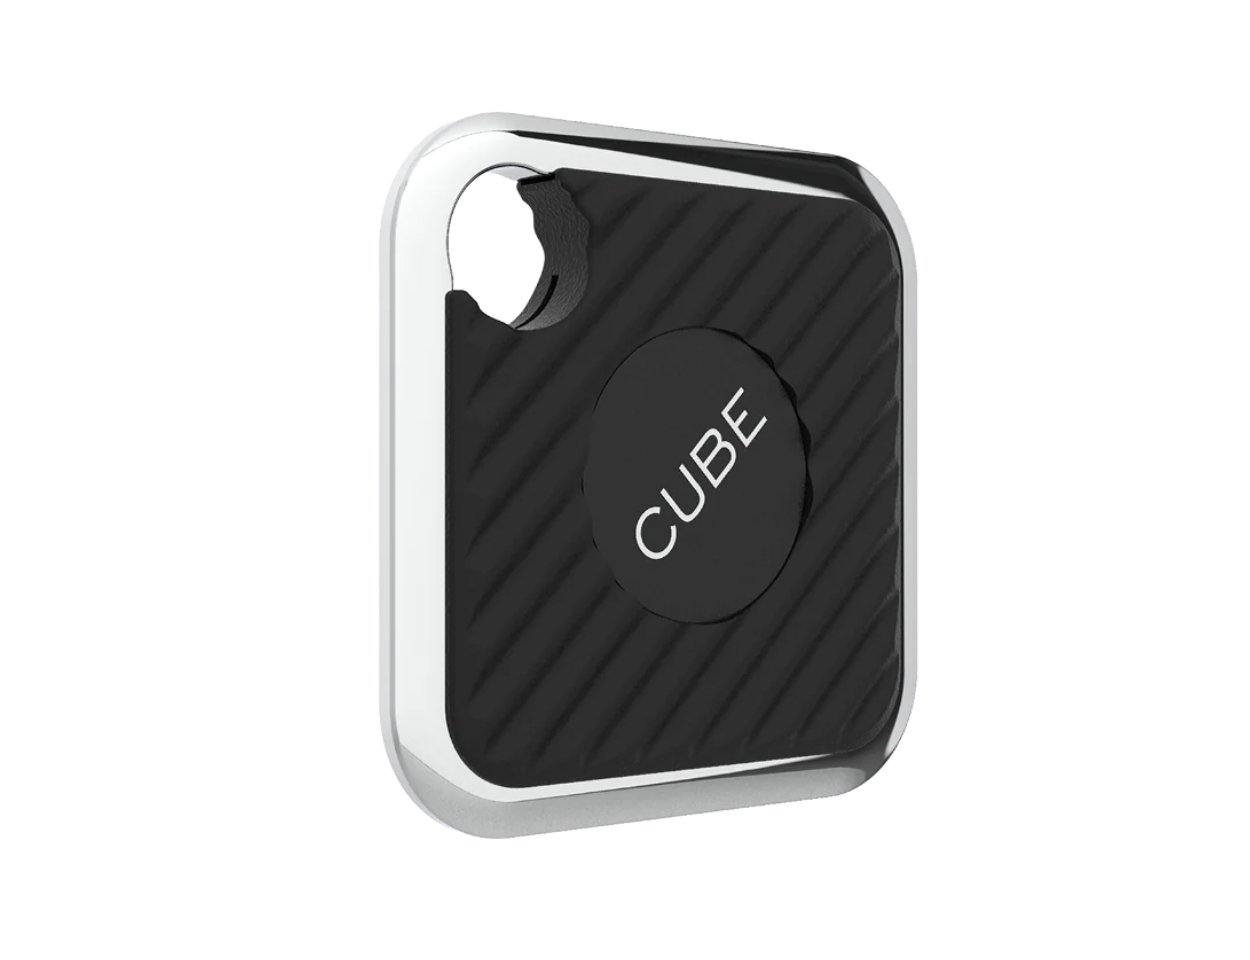 You can have the Cube Pro in any color you'd like. So long as it's black.